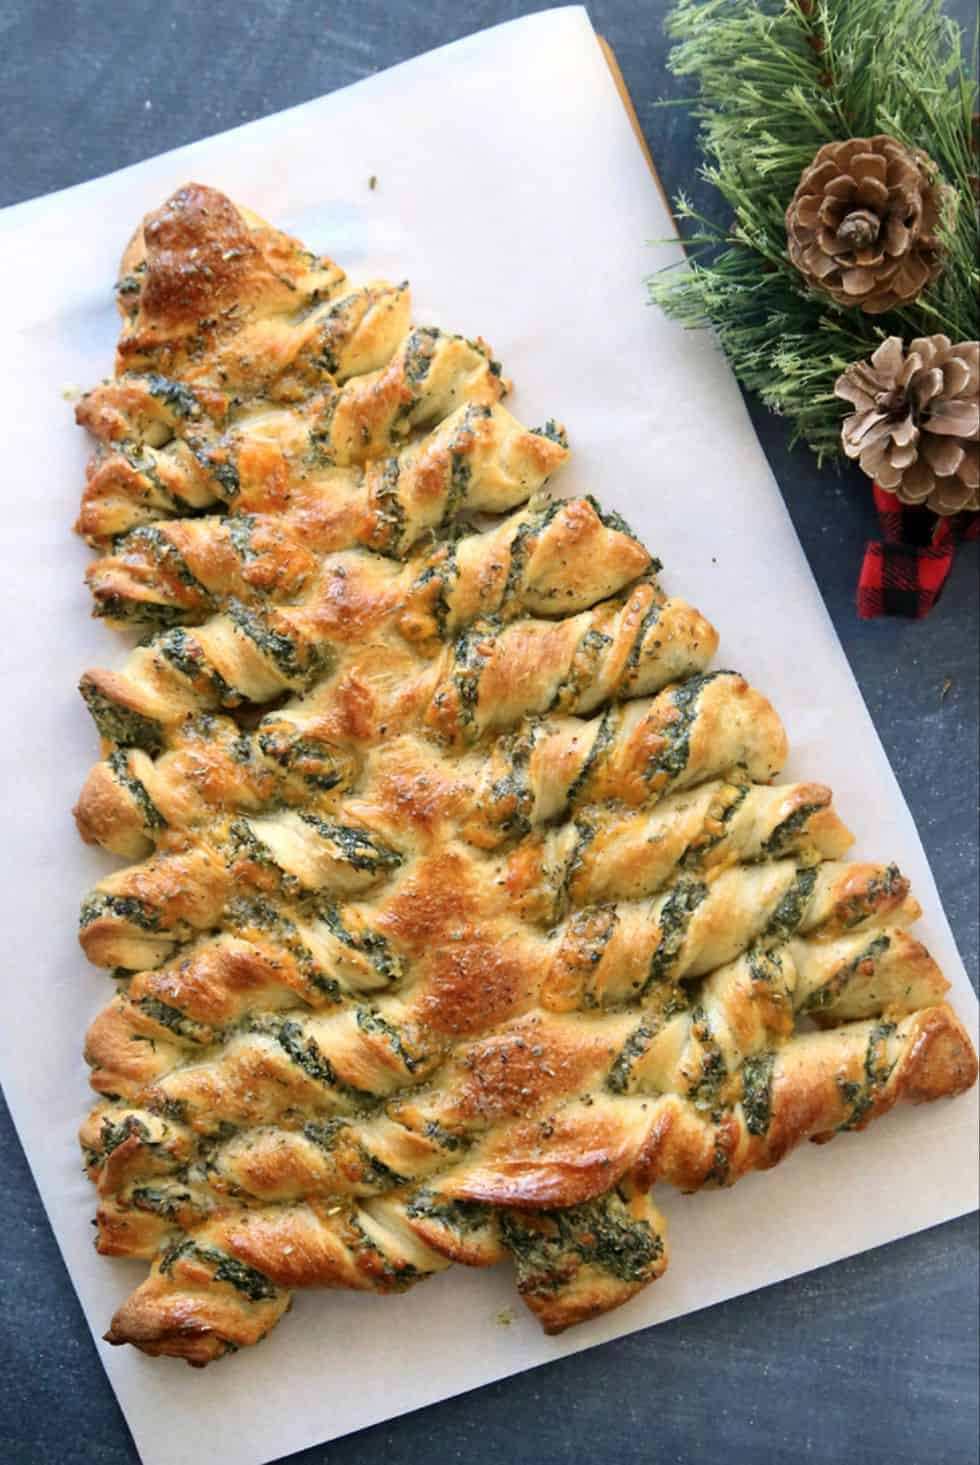 Great Christmas Appetizers
 15 Christmas Party Food Ideas That Will Top Previous Years